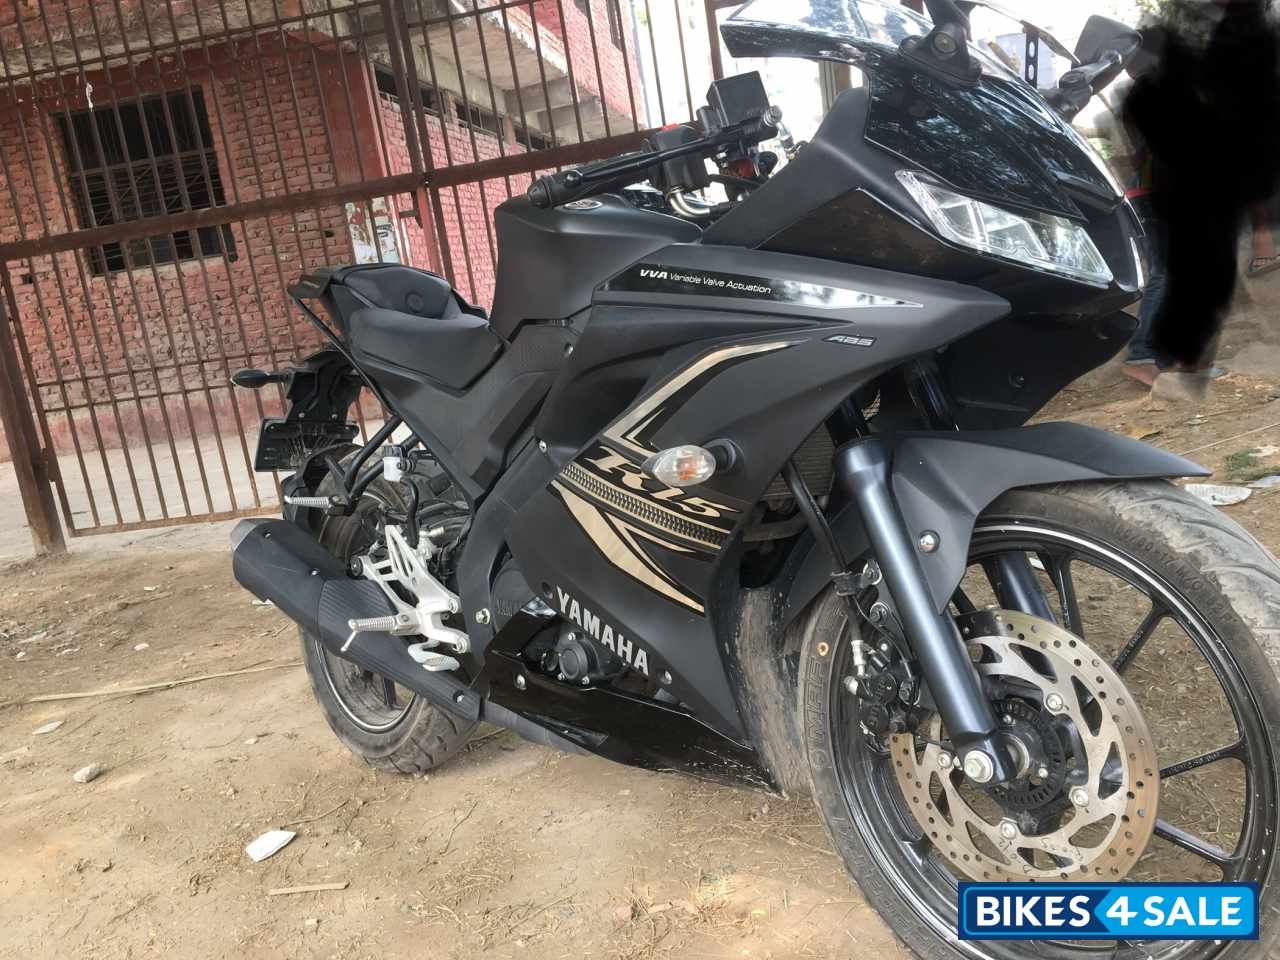 Used 2019 model Yamaha YZF R15 V3 for sale in New Delhi. ID 231191 ...